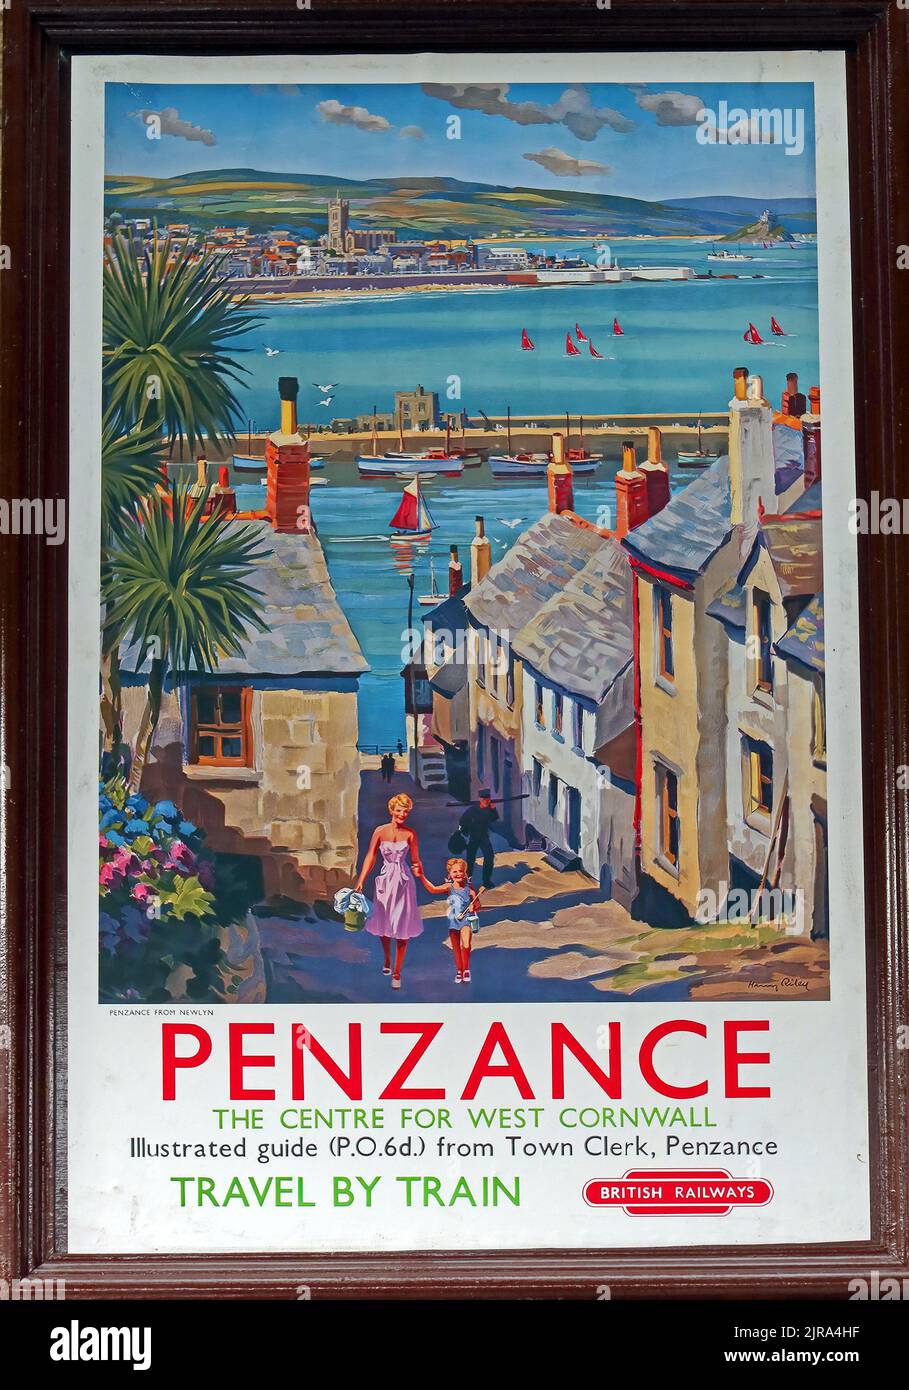 British Railways poster - Penzance, the centre for west Cornwall, South West England, UK Stock Photo